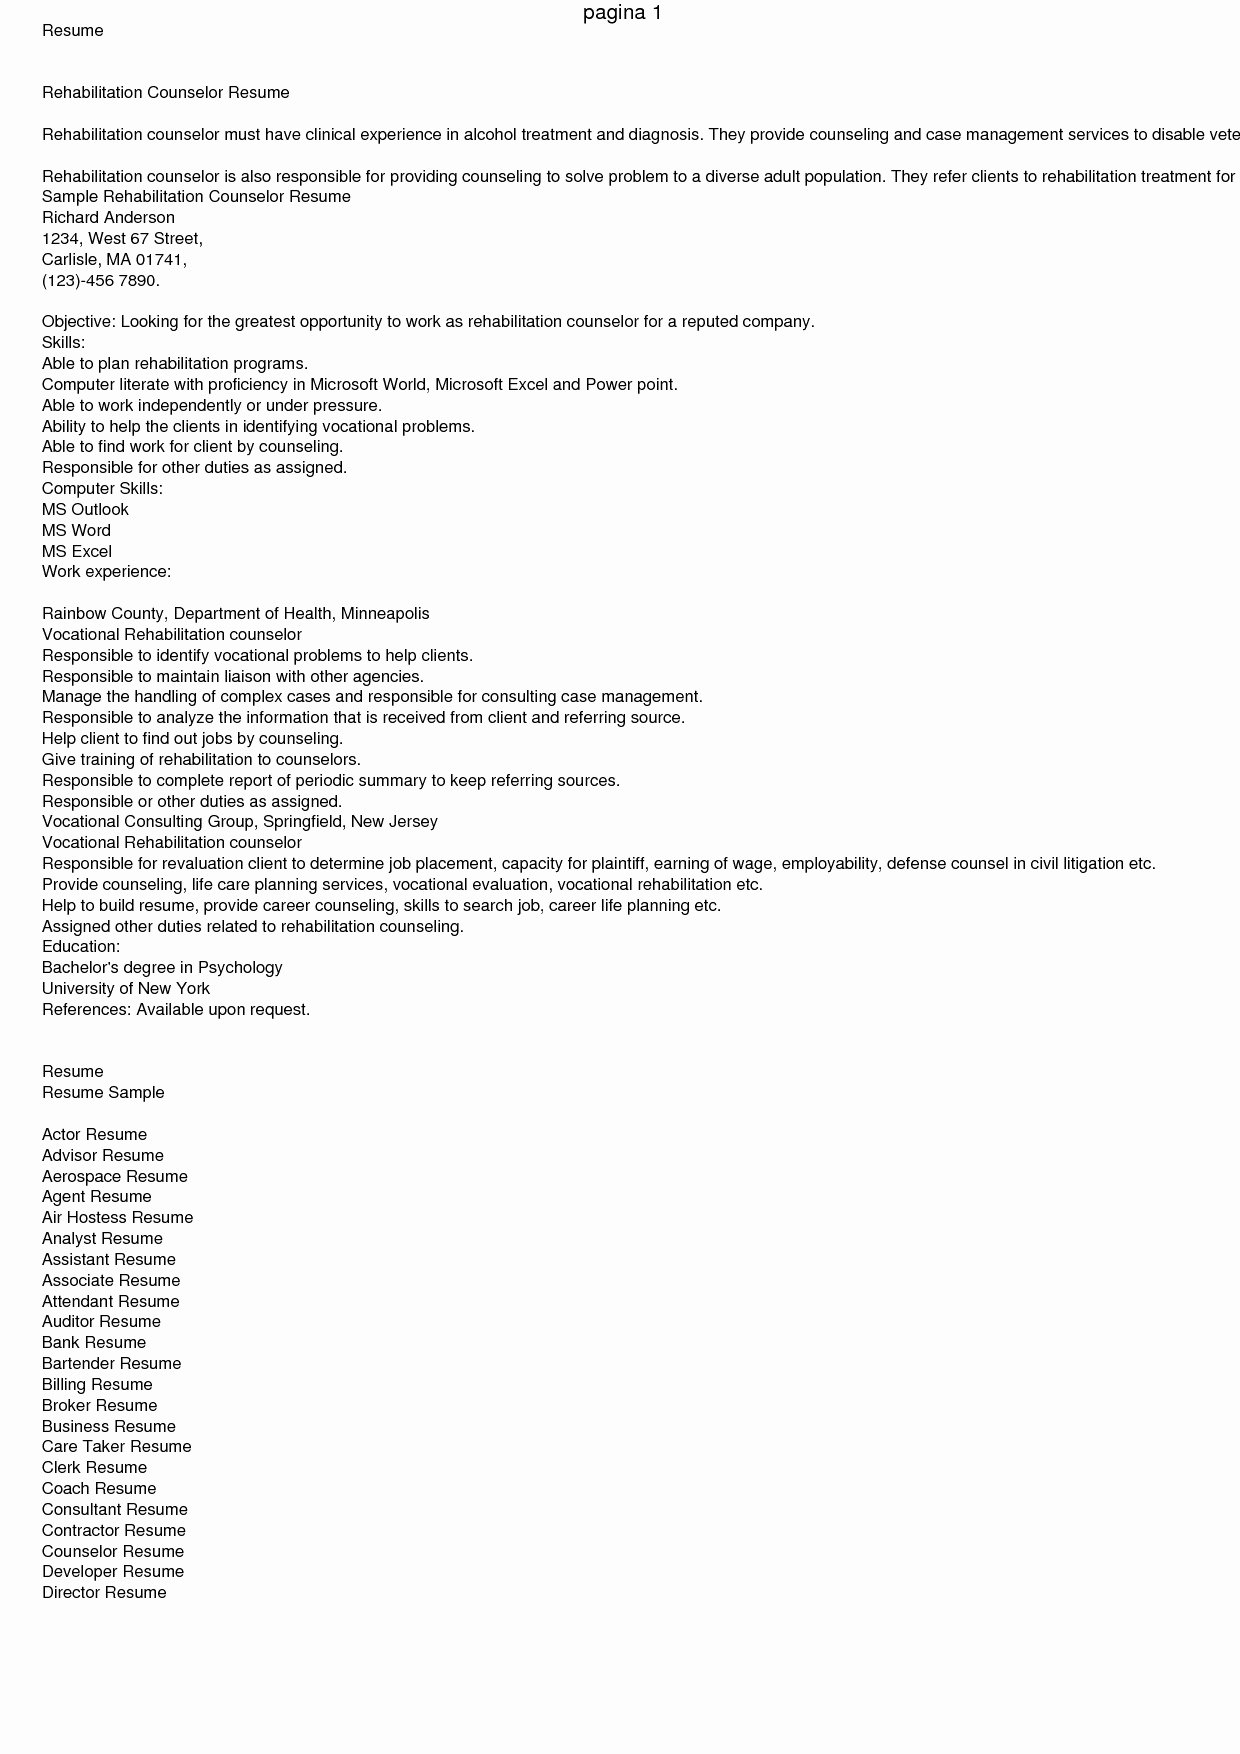 fax cover letter template google docs